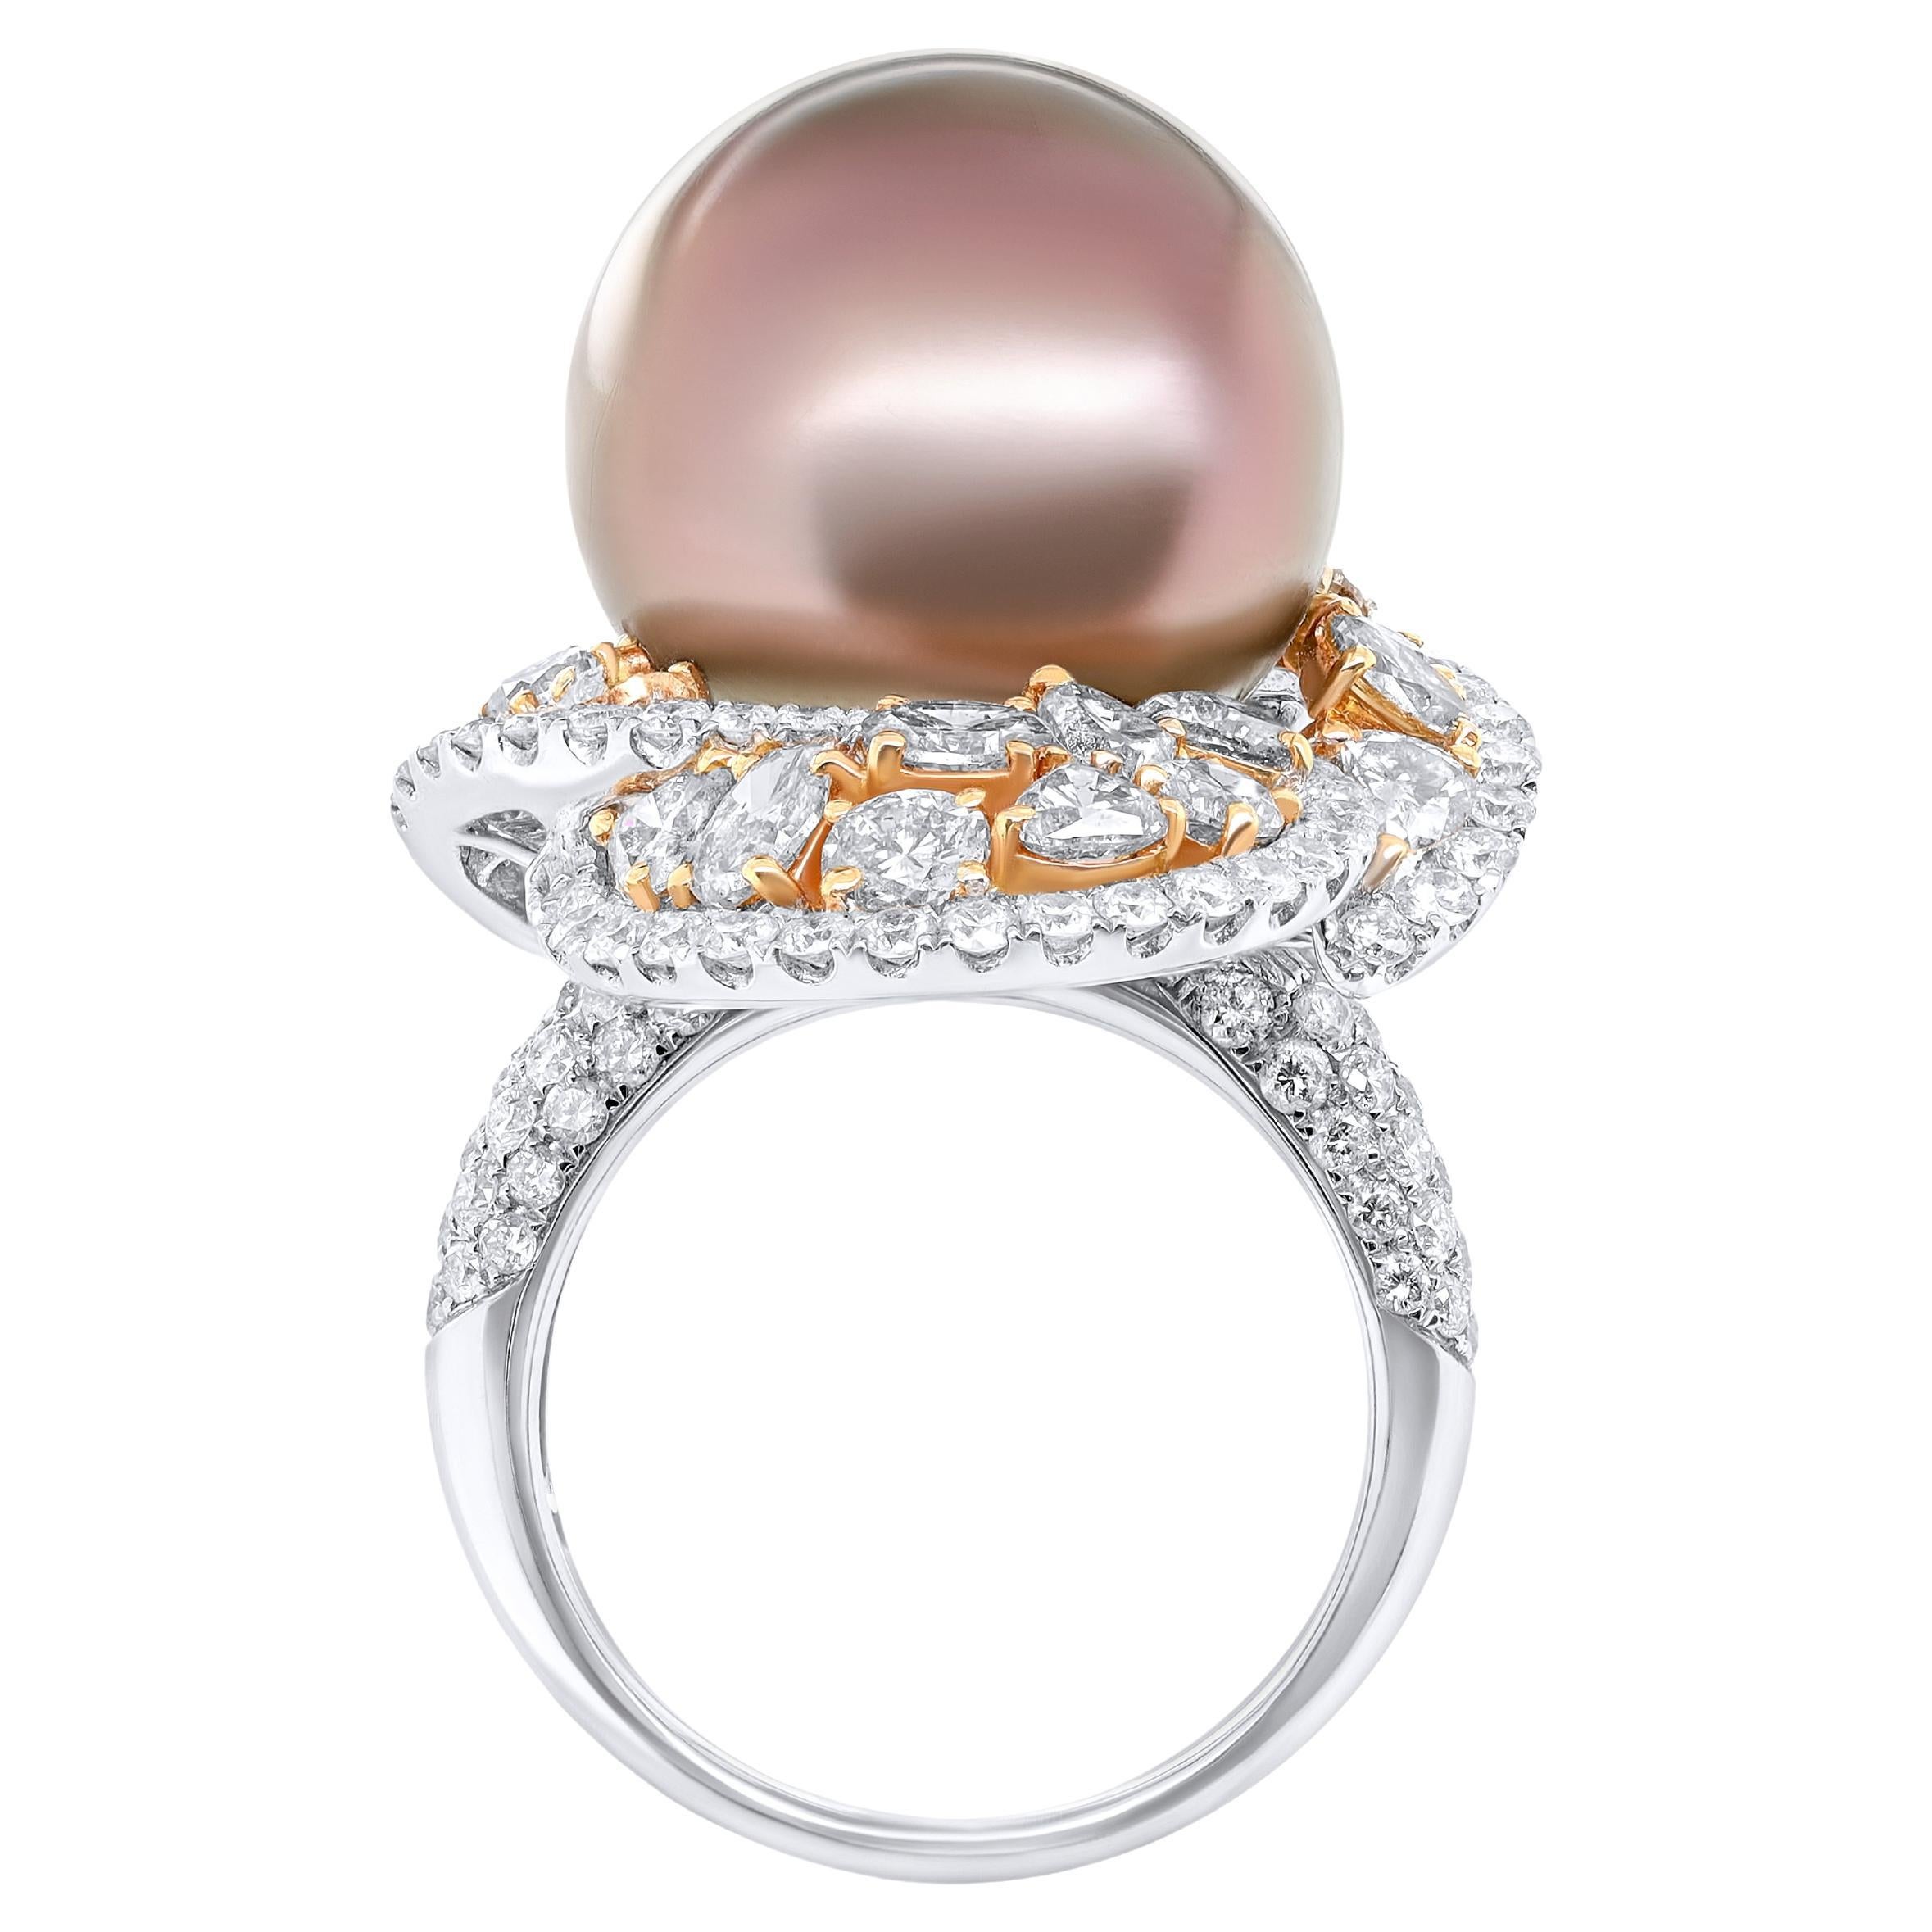 Diana M. 18 kt white gold pearl and diamond ring featuring a 16.00 mm pearl 